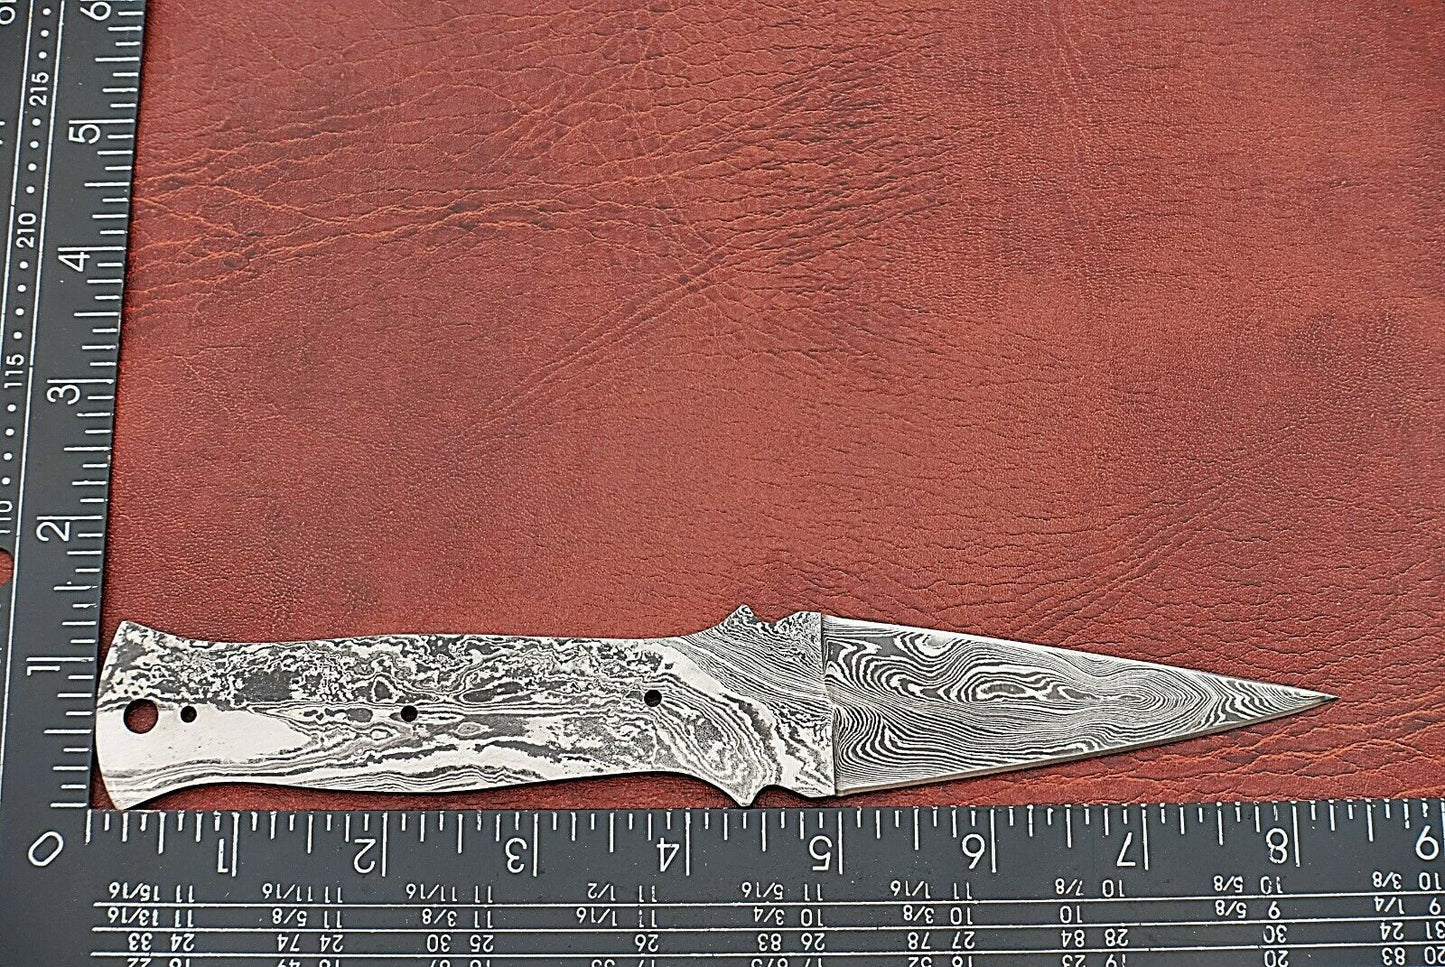 8.5" needle point Damascus steel blank blade knife with 4" dual cutting edge